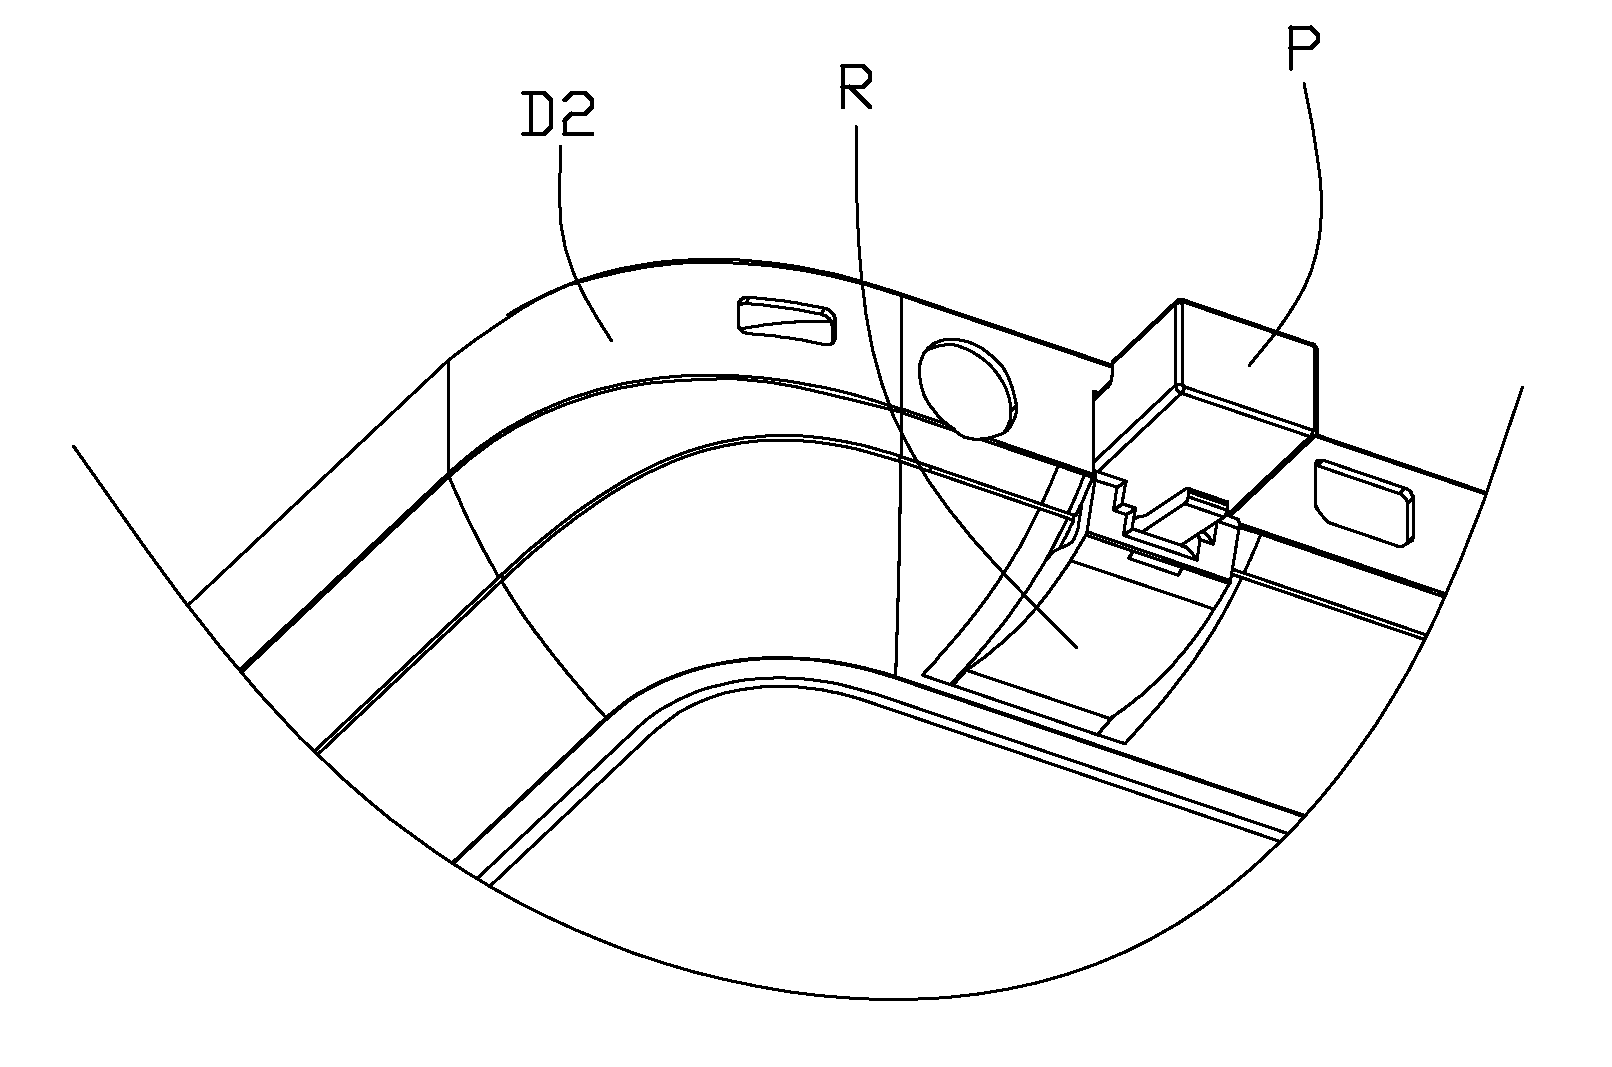 Electrical device with a clamshell electrical connector